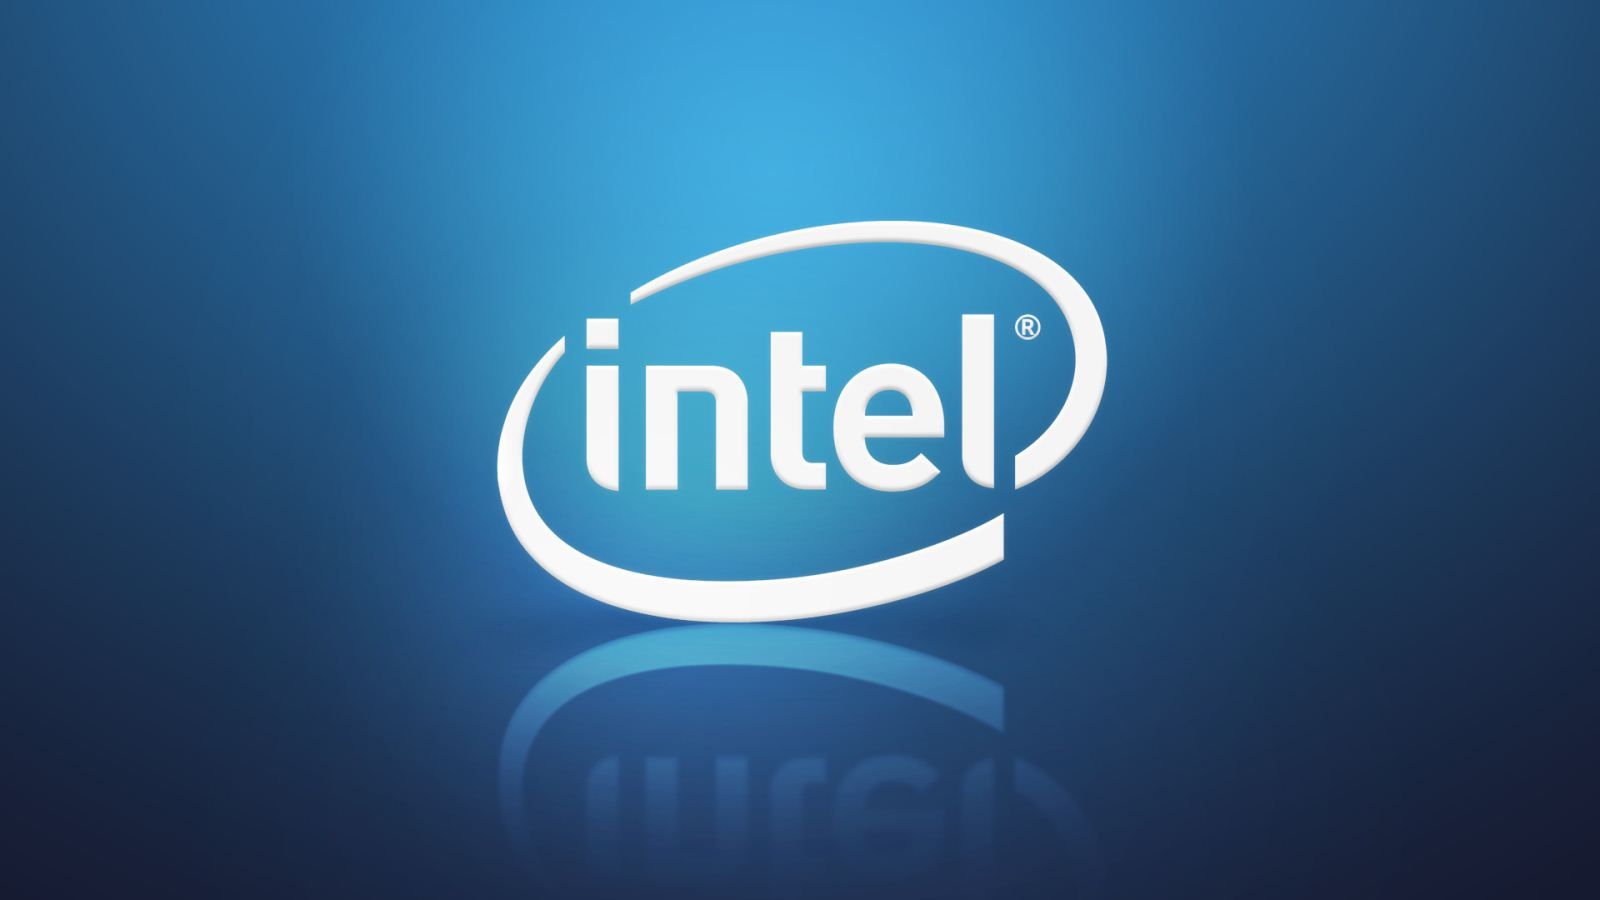 intel s upcoming haswell to boost macbook battery life by 50 per cent image 1